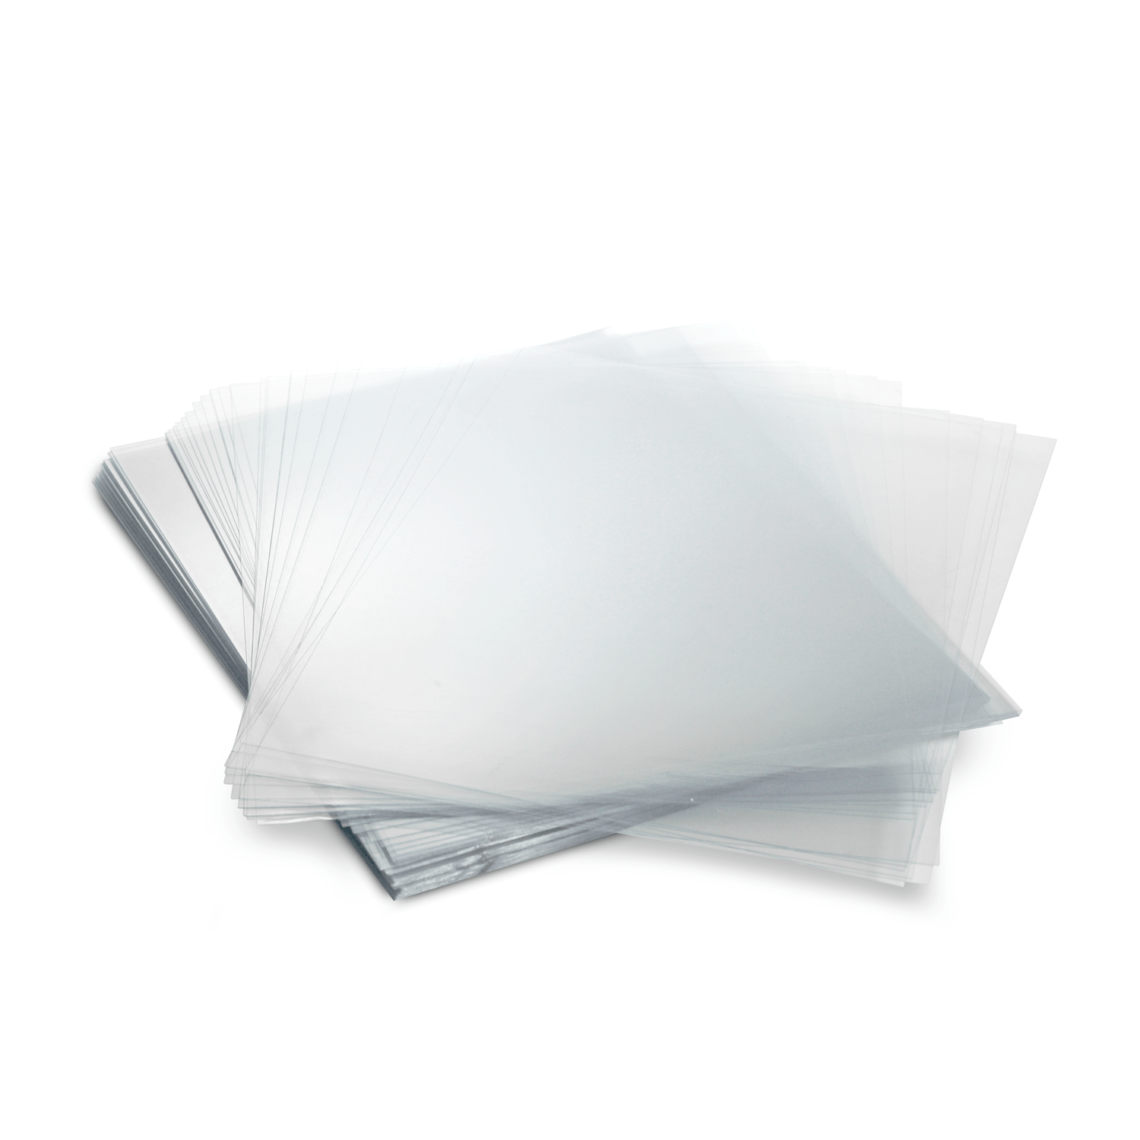 8.5 x 11 Clear 5 Mil Plastic Presentation Binding Covers (Light Weight)  100 Pieces